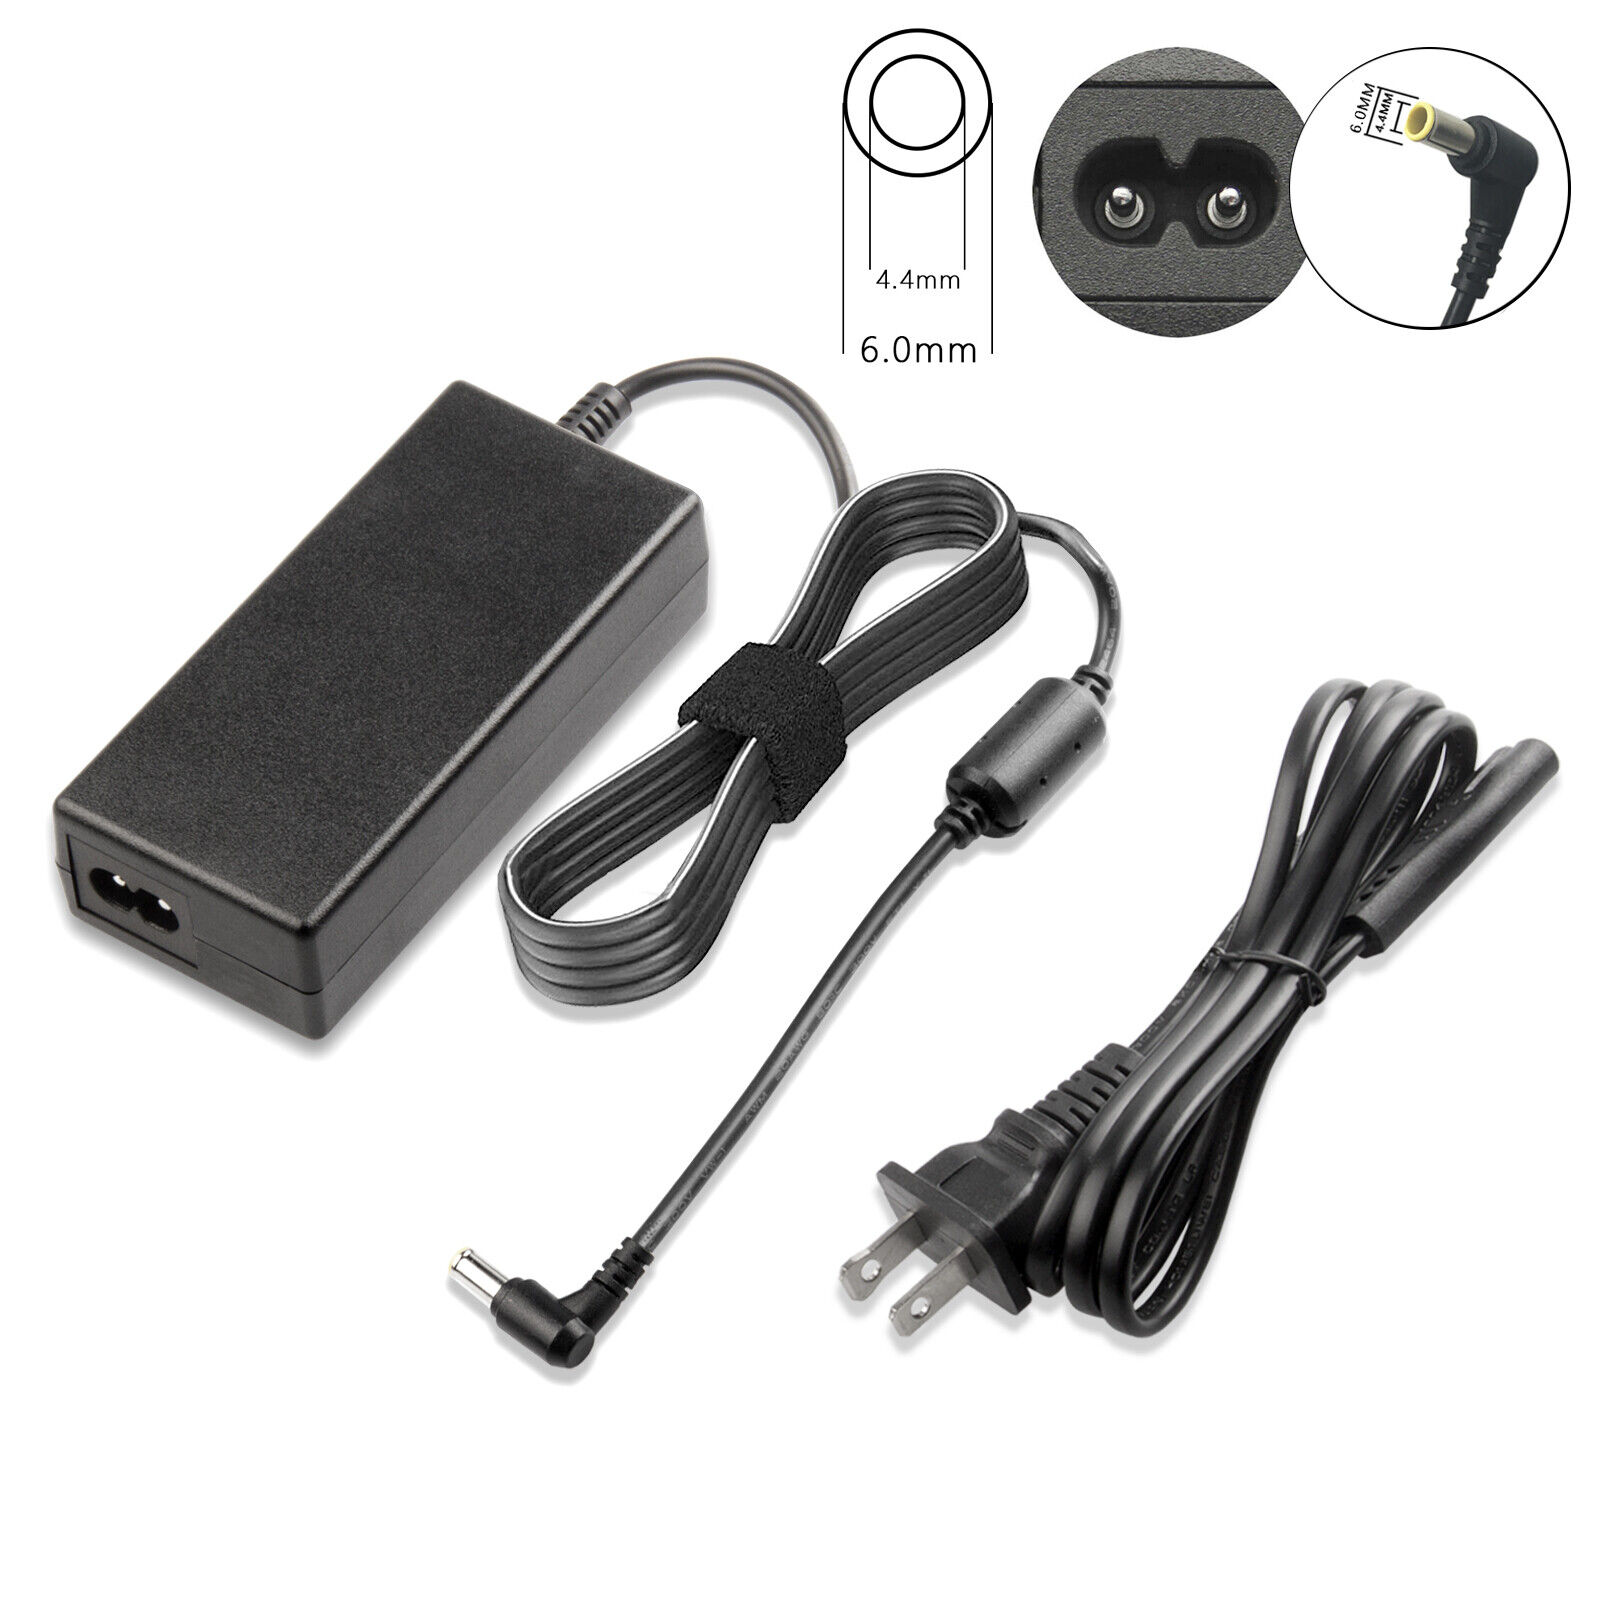 AC Adapter Power For Samsung SyncMaster S22A300B S20A350B S22A100N LED Monitor